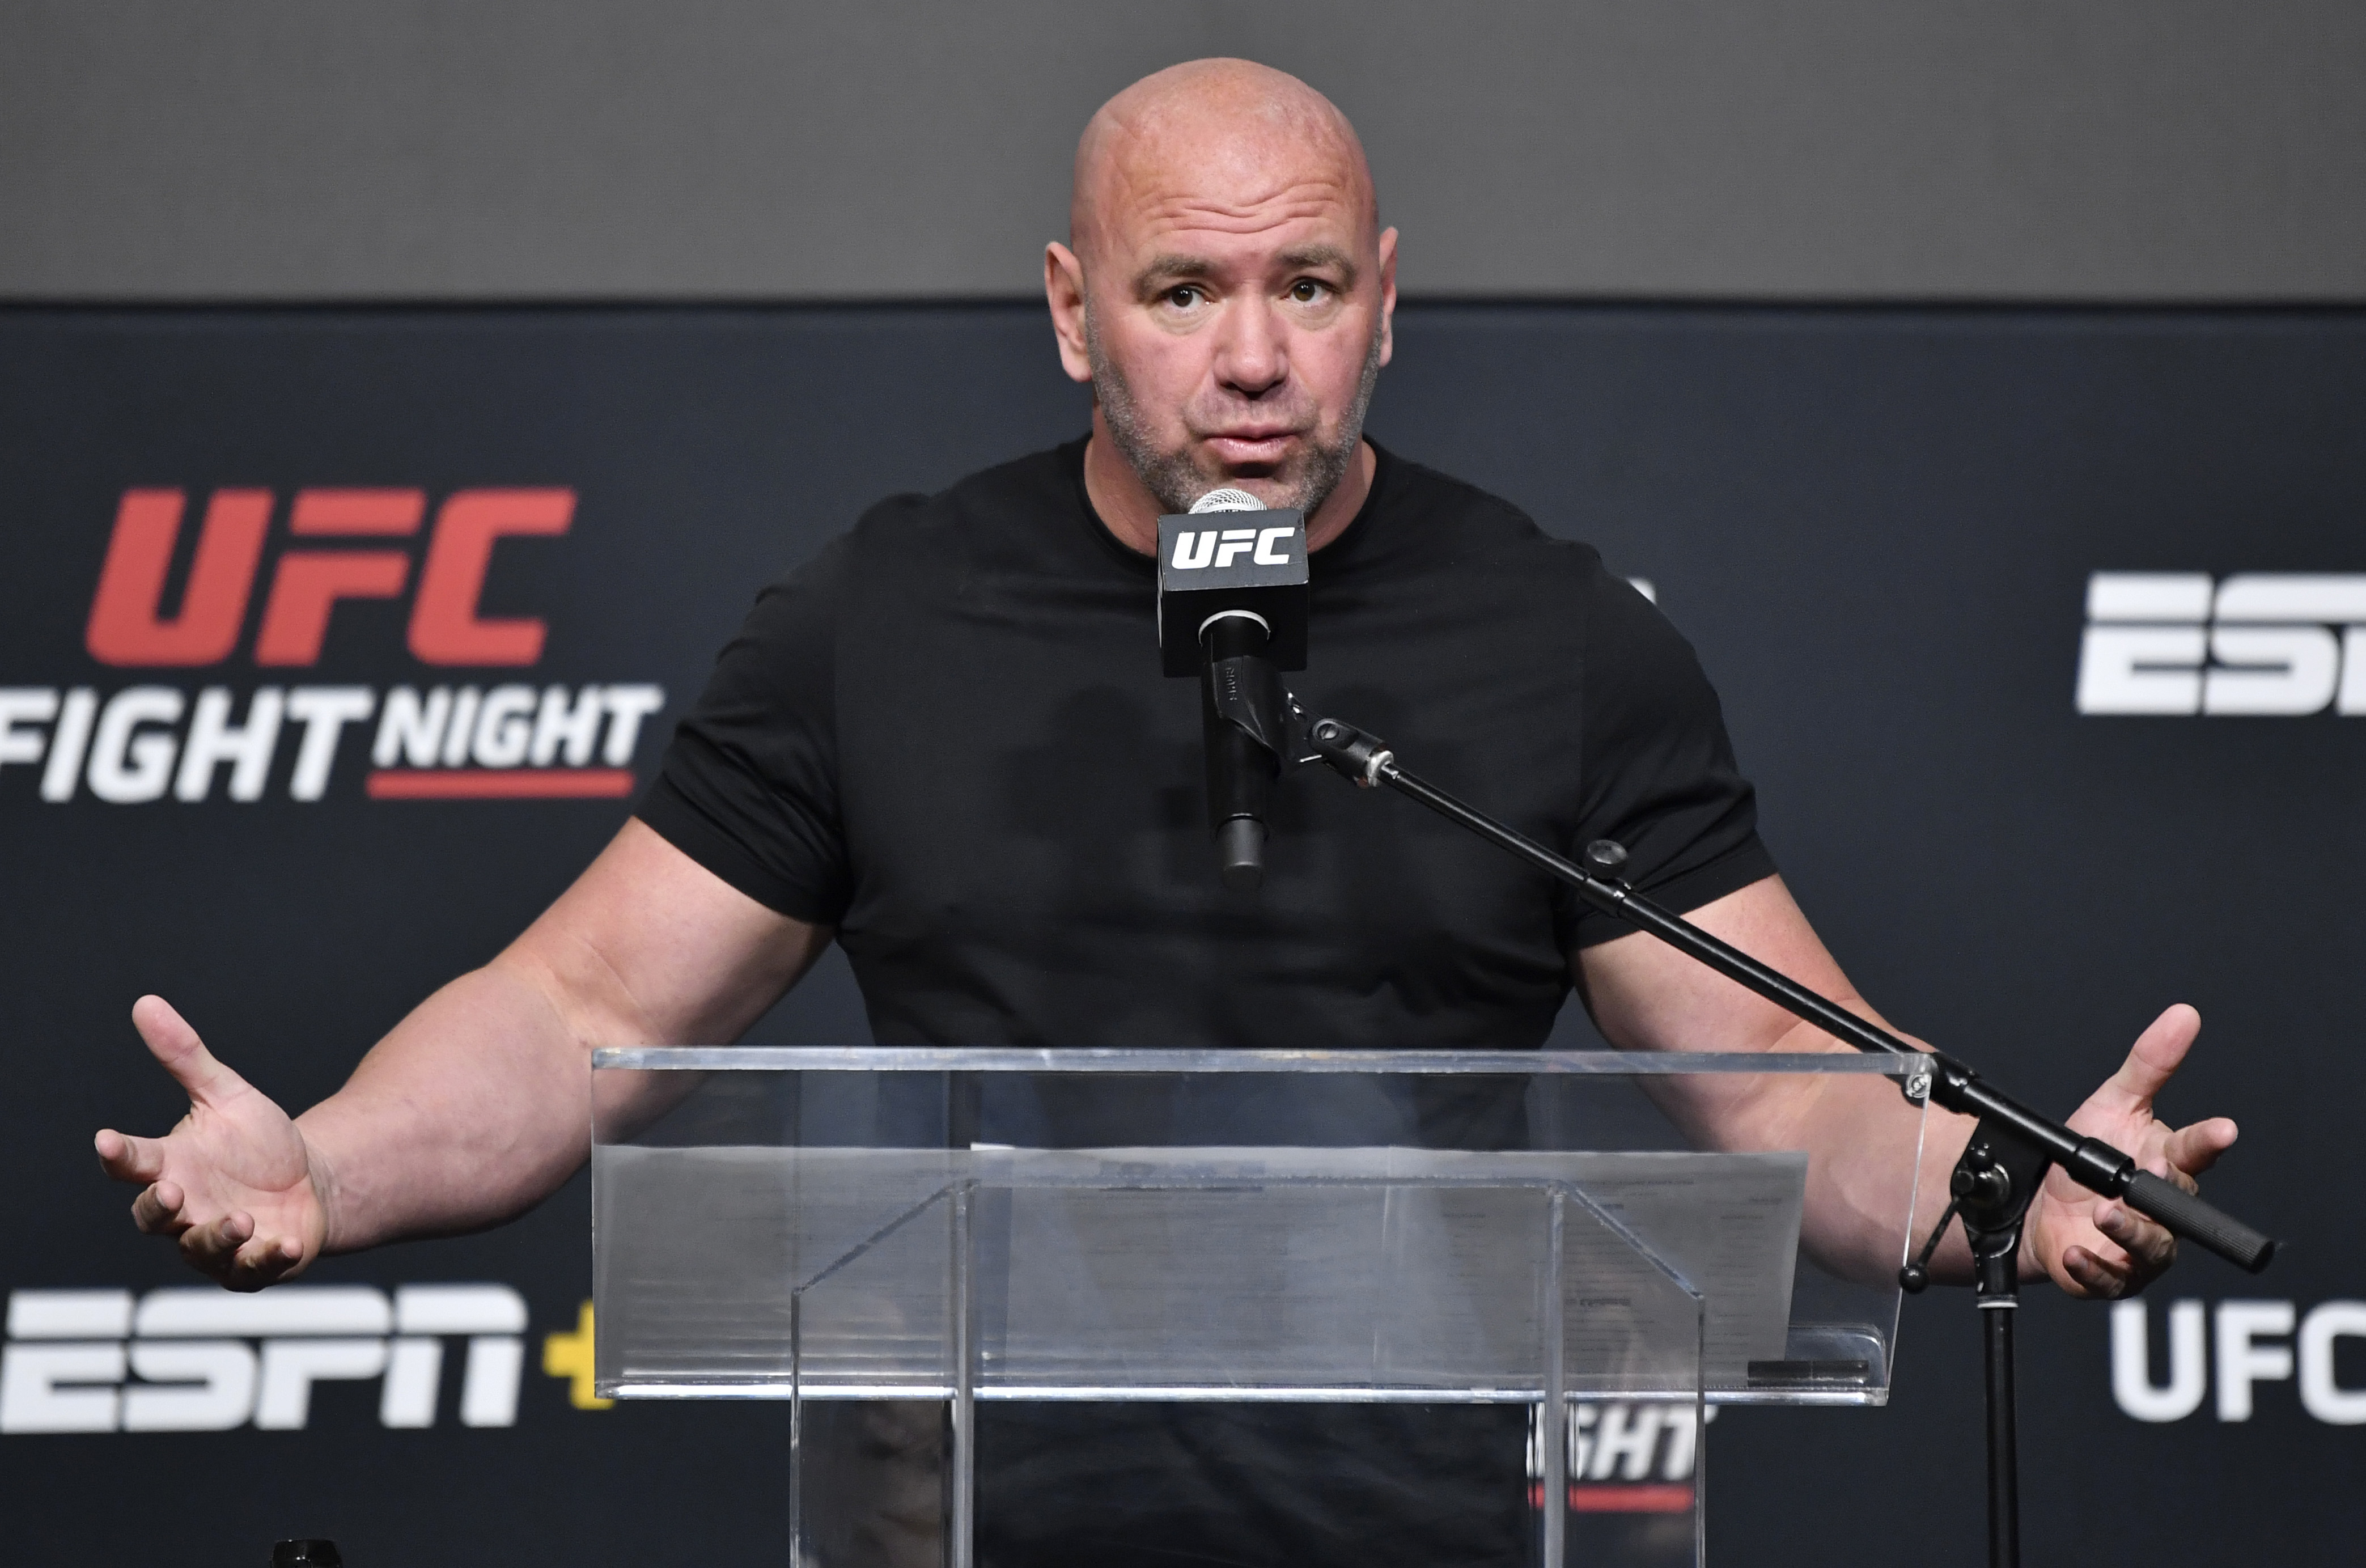 Dana White talking to the media after a UFC event